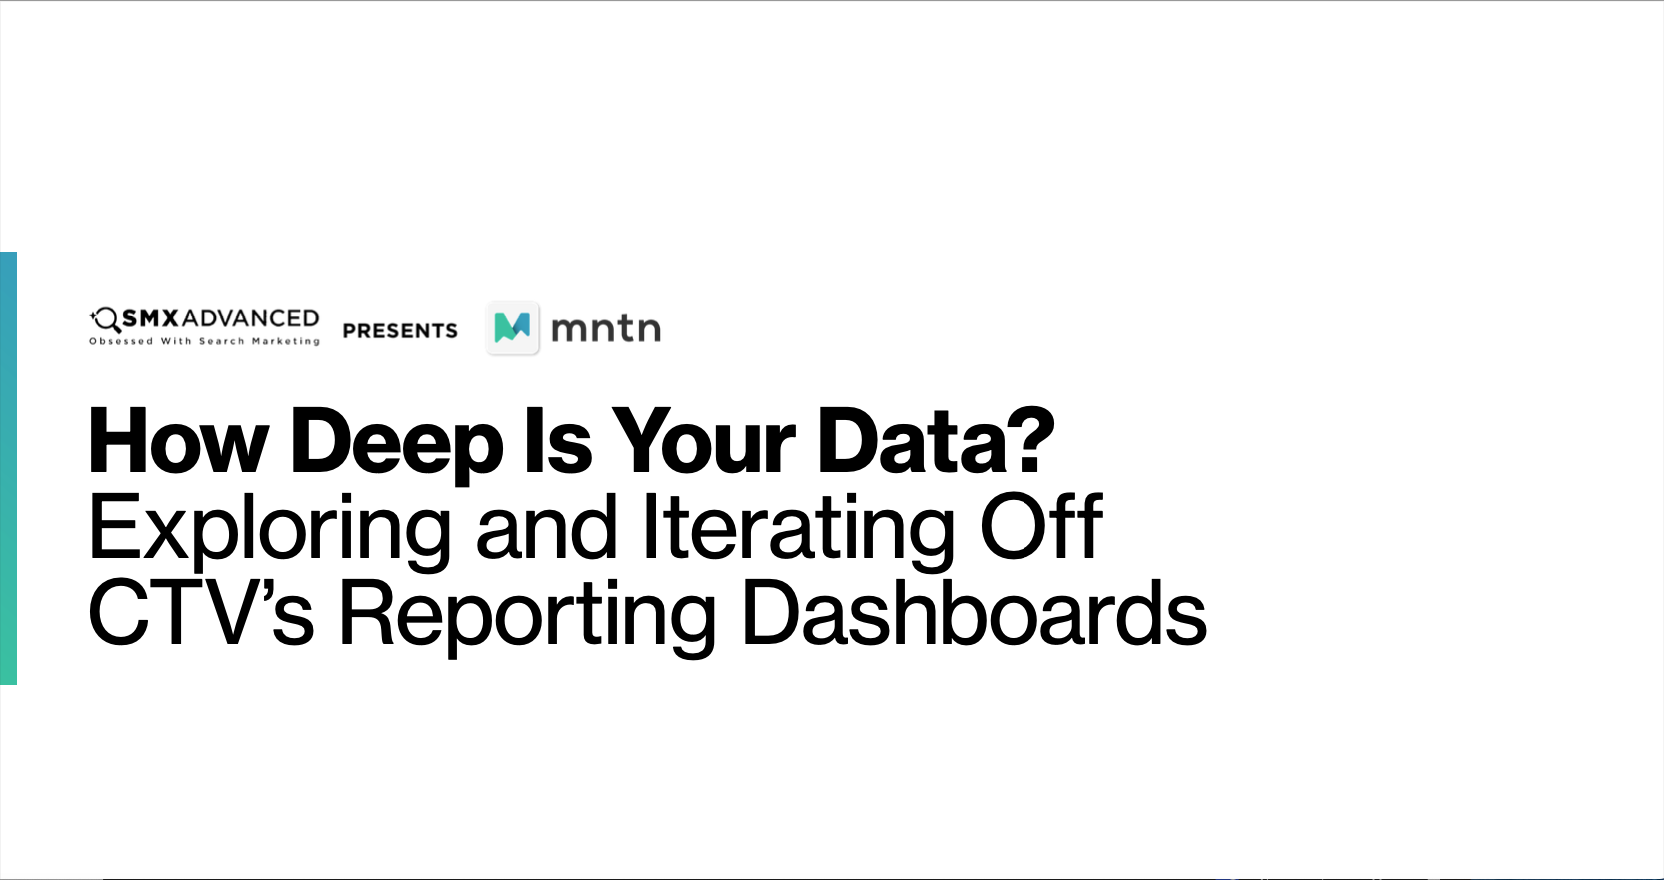 How Deep is Your Data? Exploring and Iterating Off CTV’s Reporting Dashboards